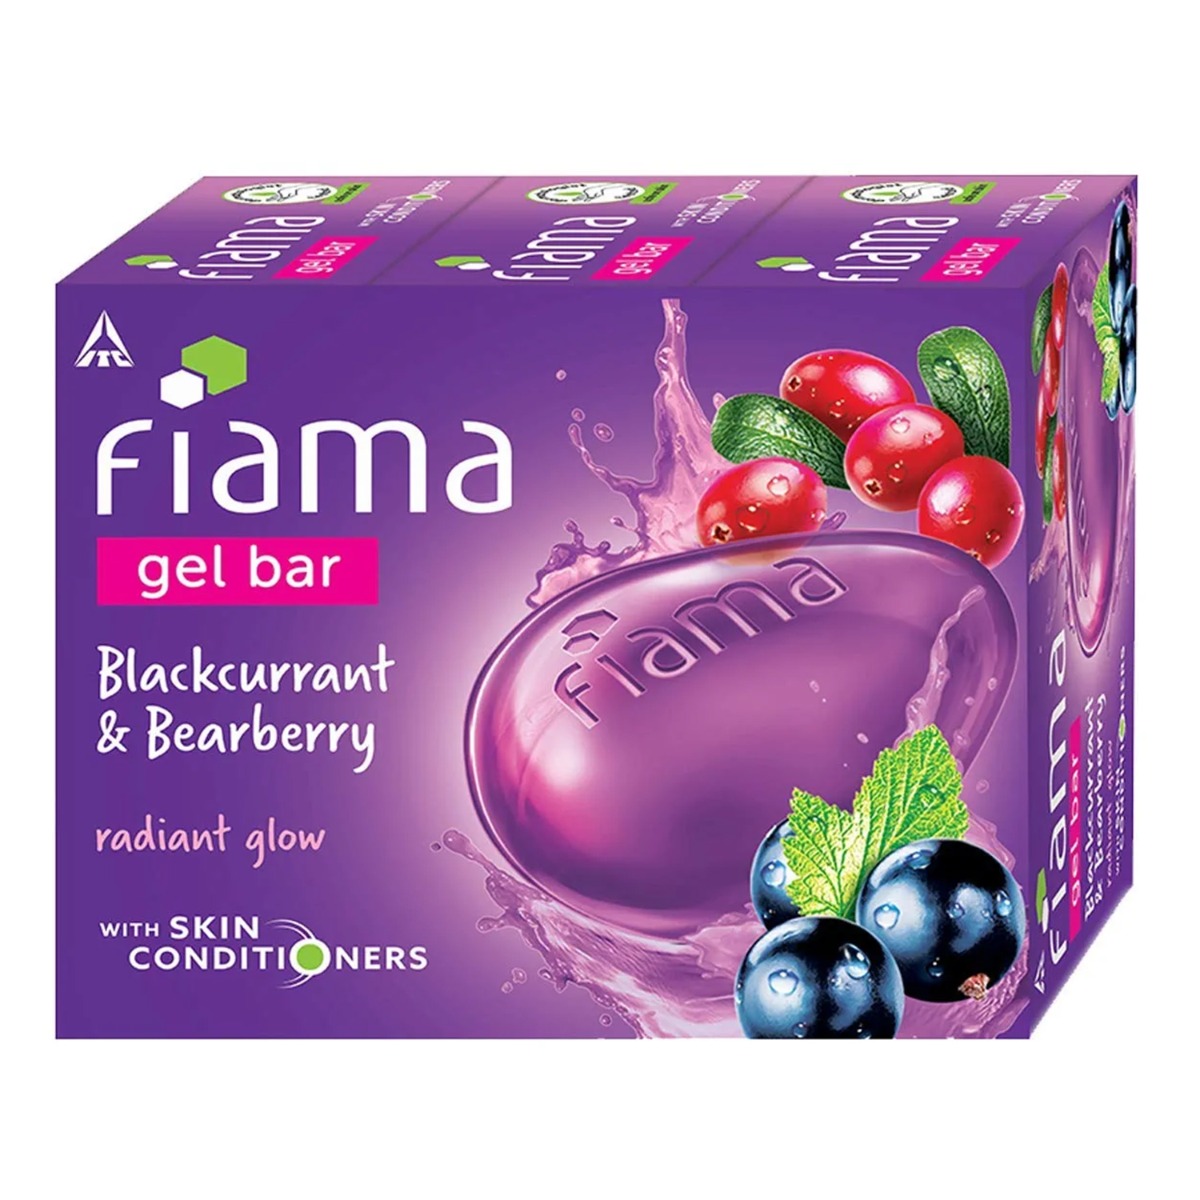 Fiama Gel Bar Blackcurrant & Bearberry For Radiant Glowing Skin, With Skin Conditioners - Pack Of 3, 125gm Each